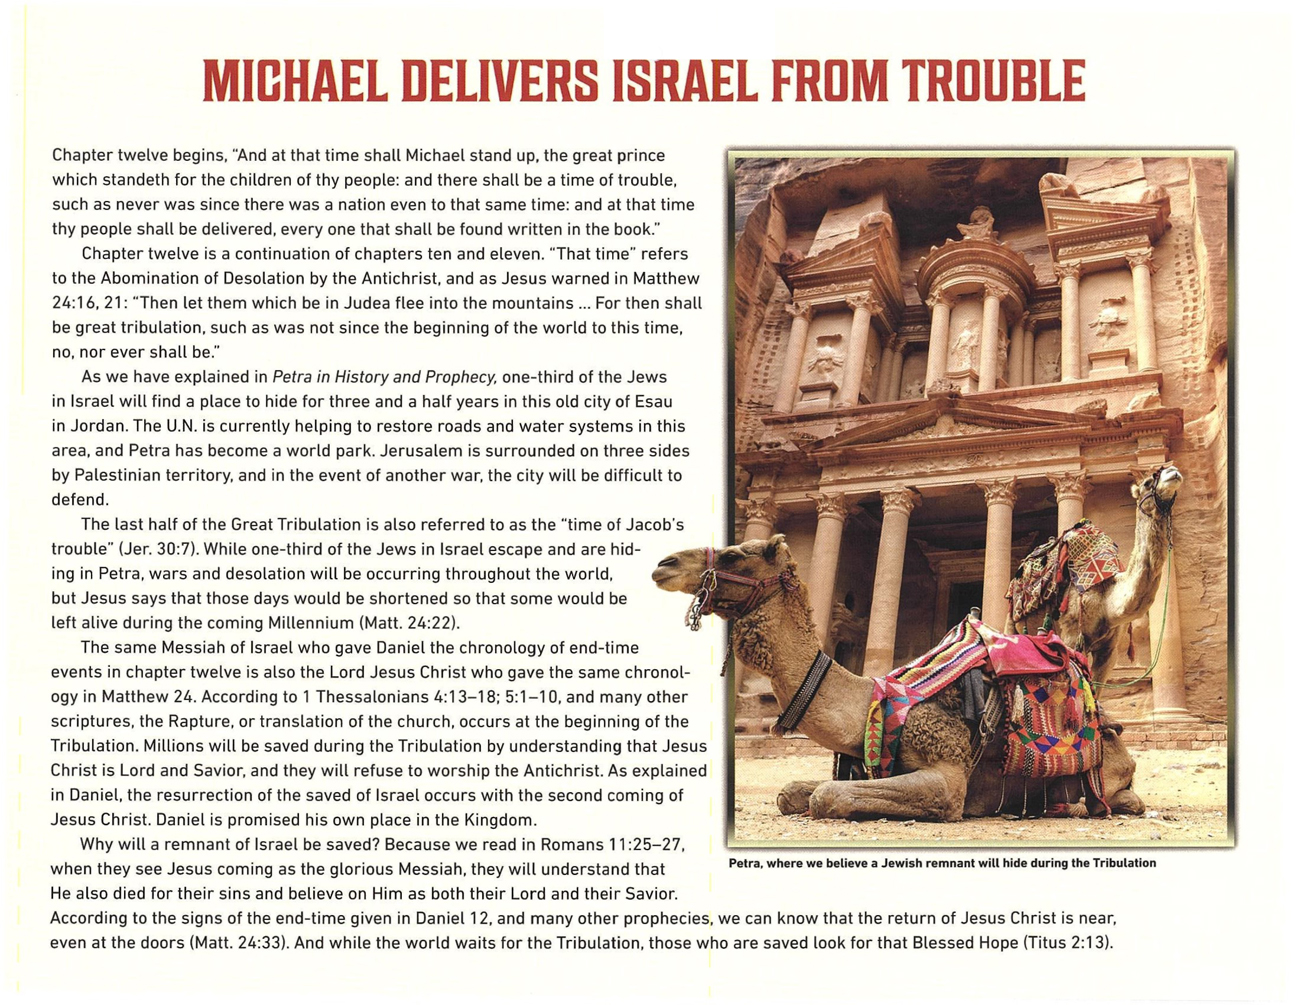 2021 Prophecy Calendar: December - Michael Delivers Israel from Trouble